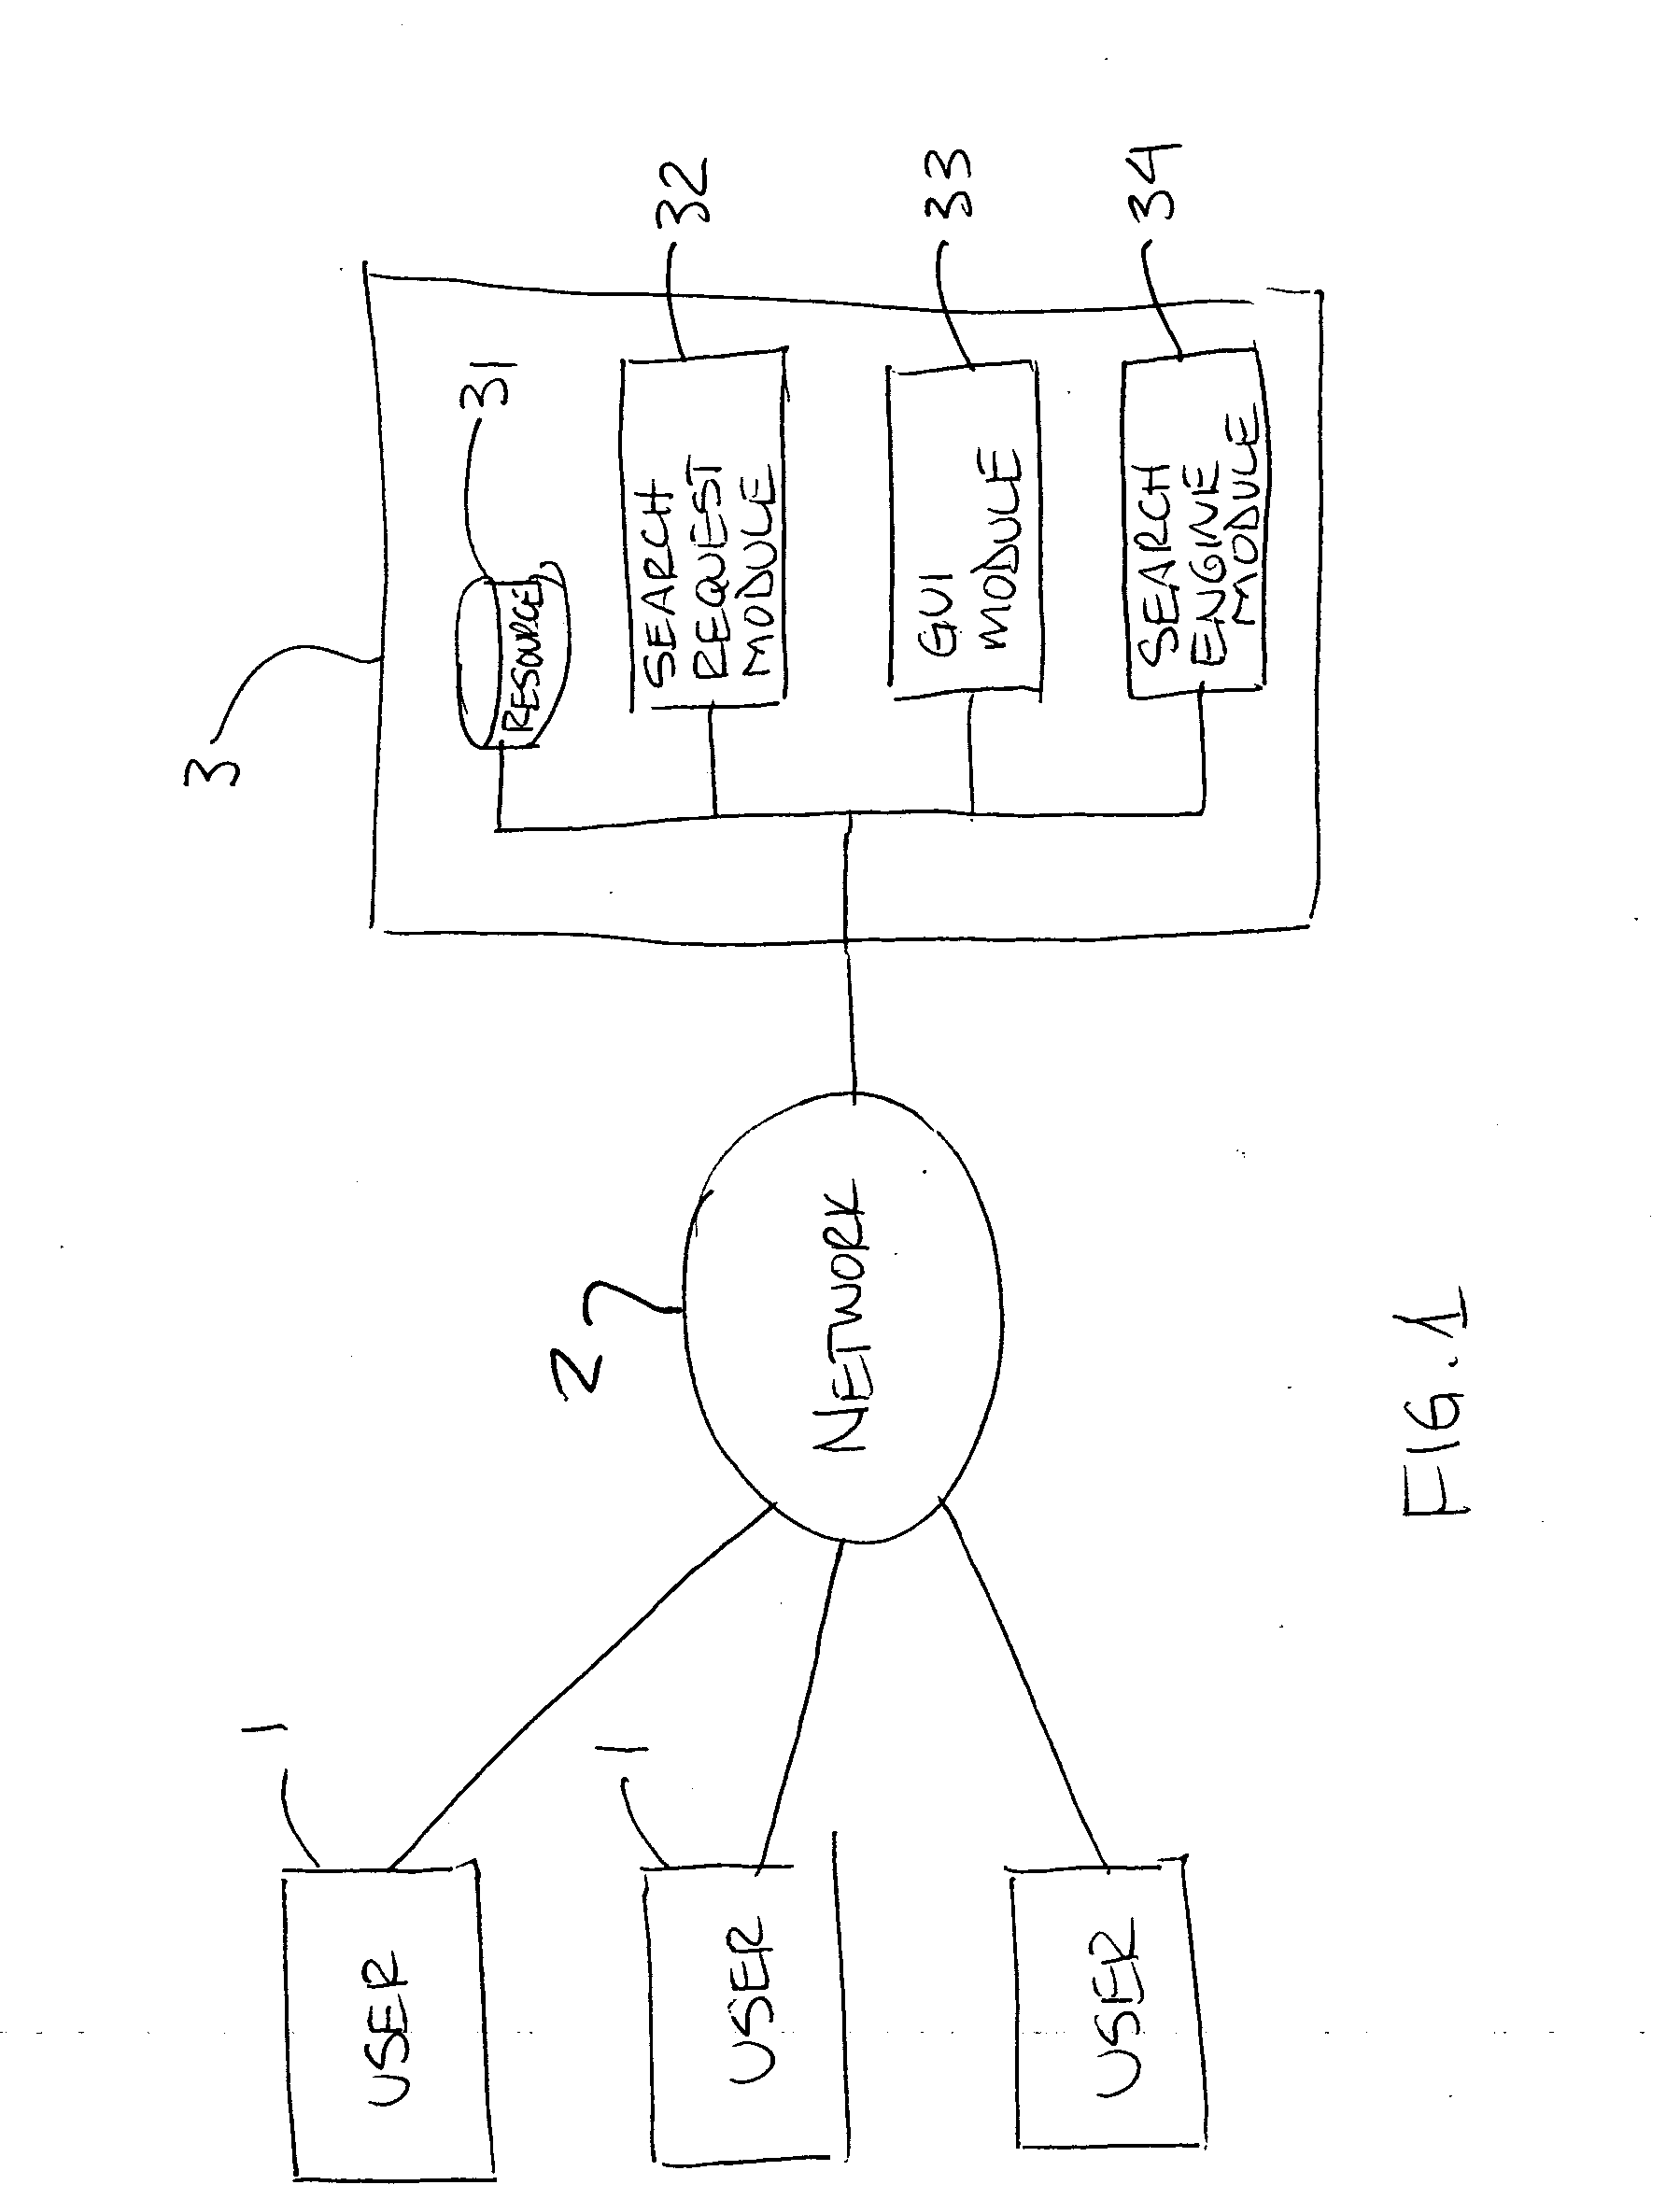 Method and apparatus for presenting computerized search results in a medical information system